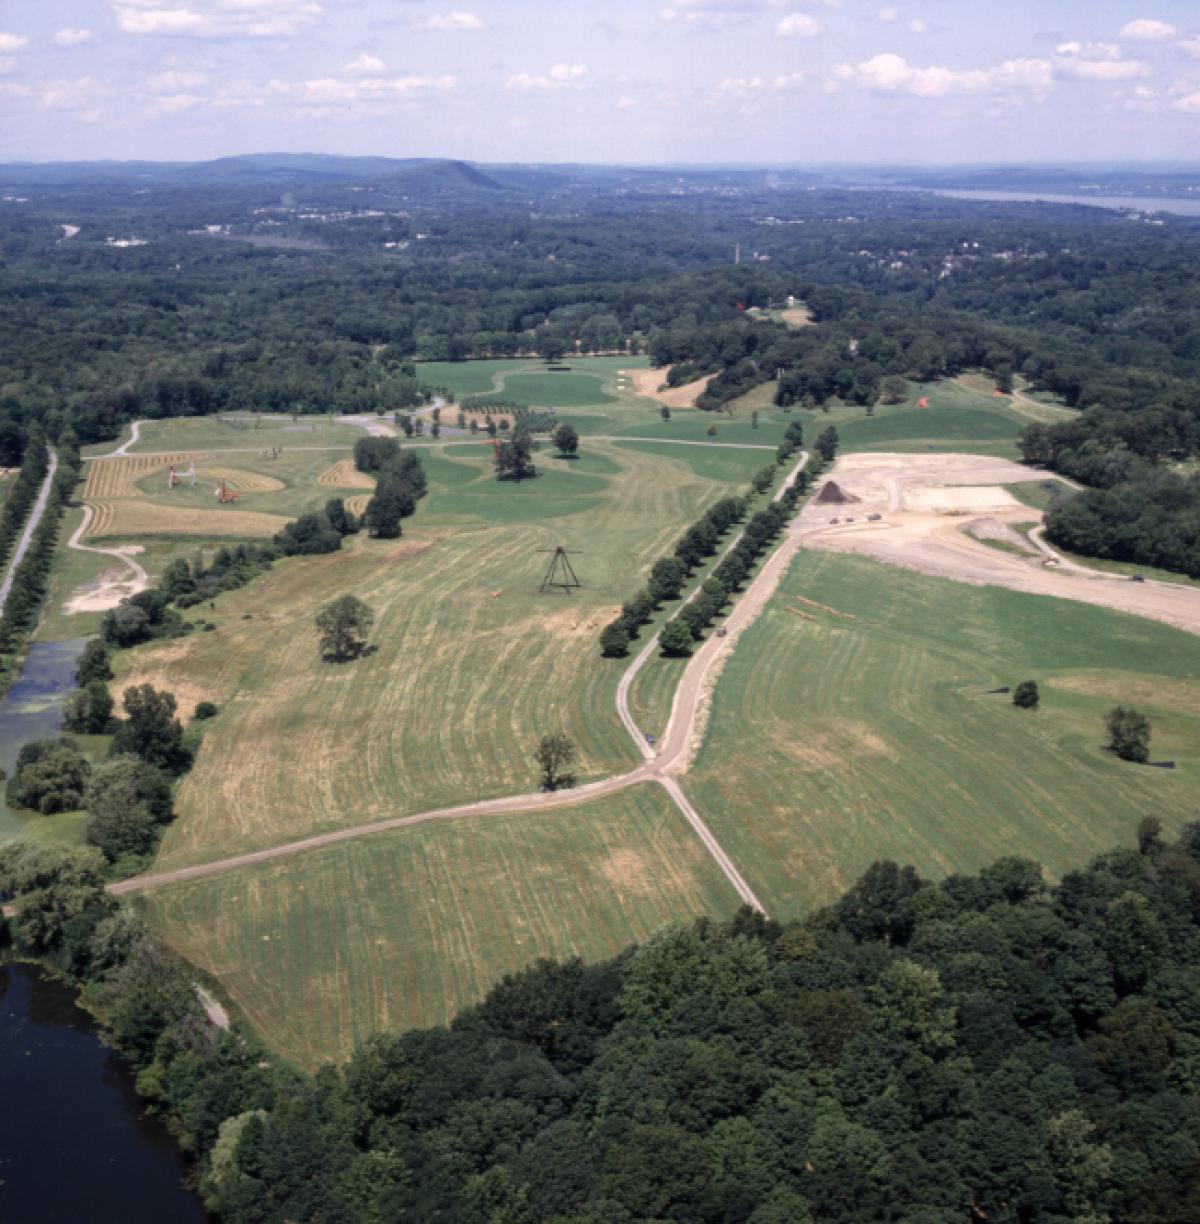 Storm King Aerial View, 1996